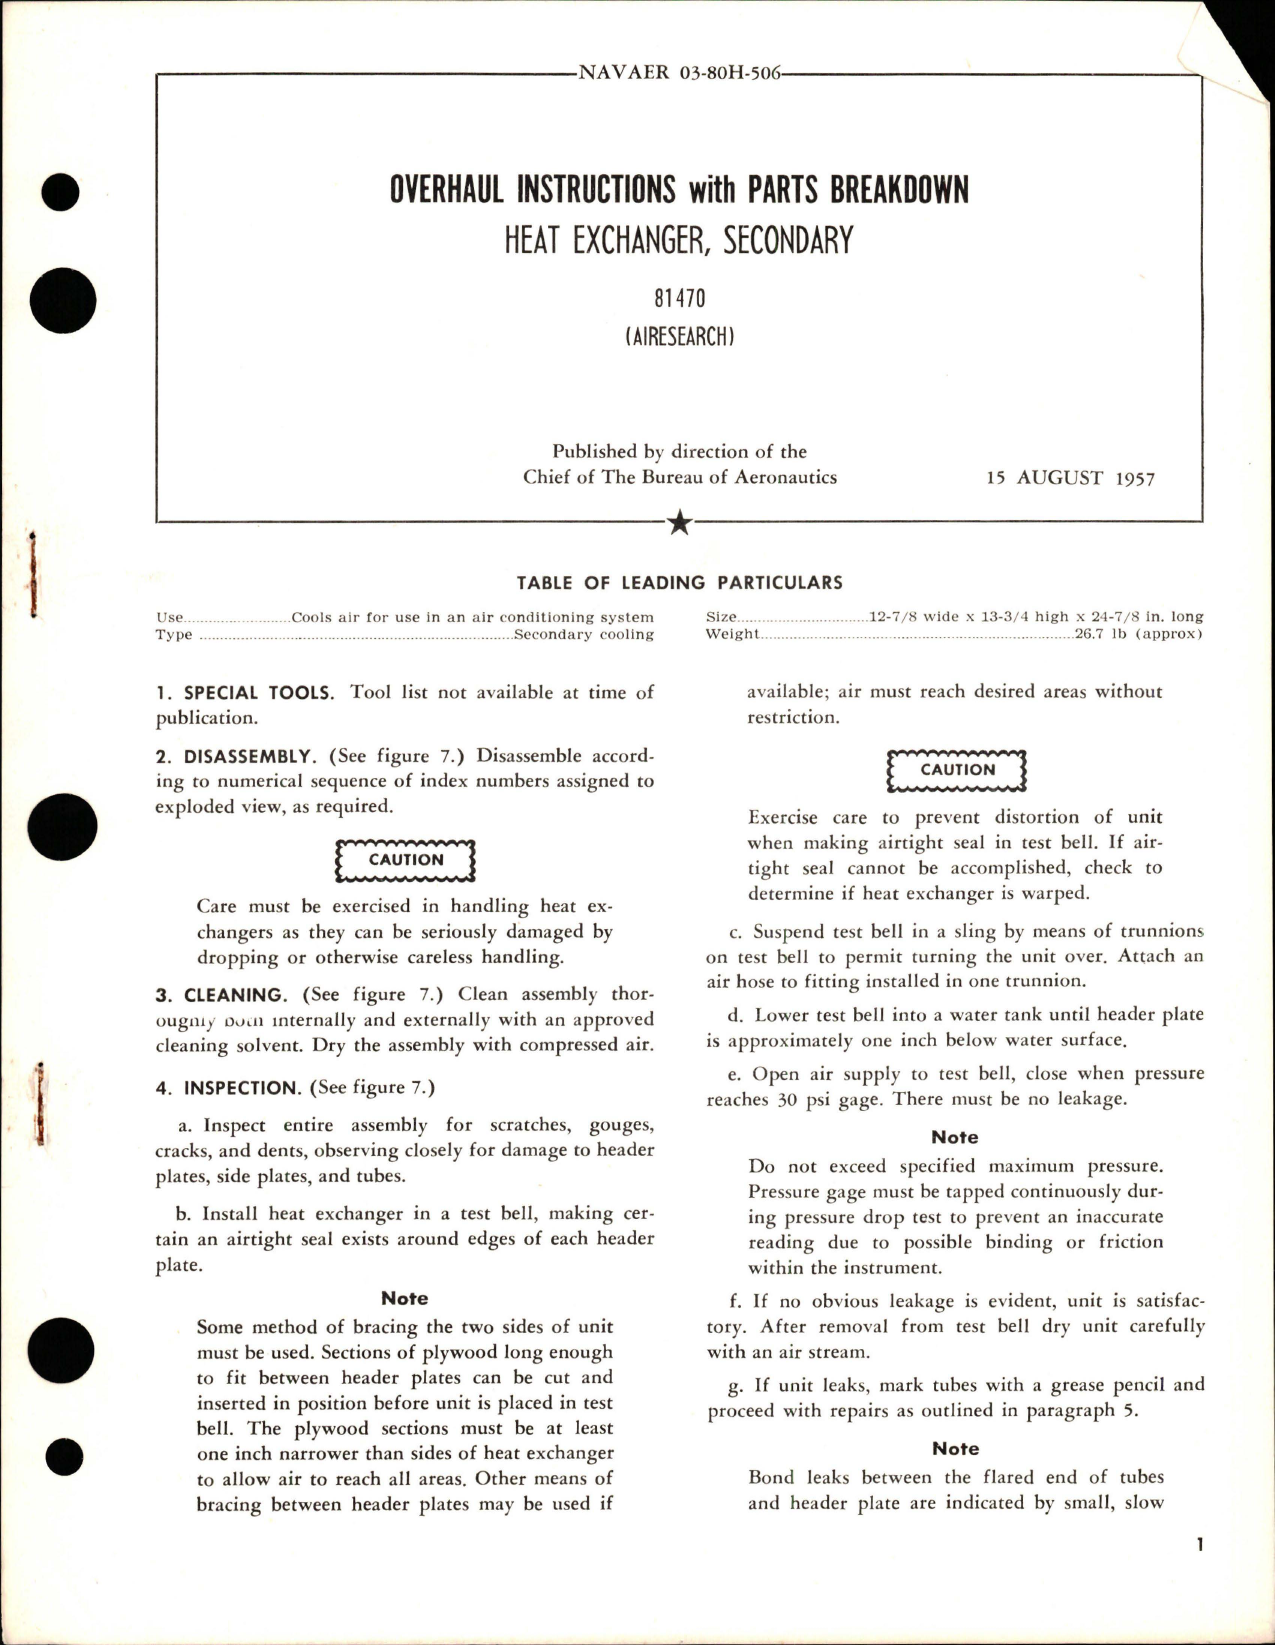 Sample page 1 from AirCorps Library document: Overhaul Instructions with Parts Breakdown for Secondary Heat Exchanger - 81470